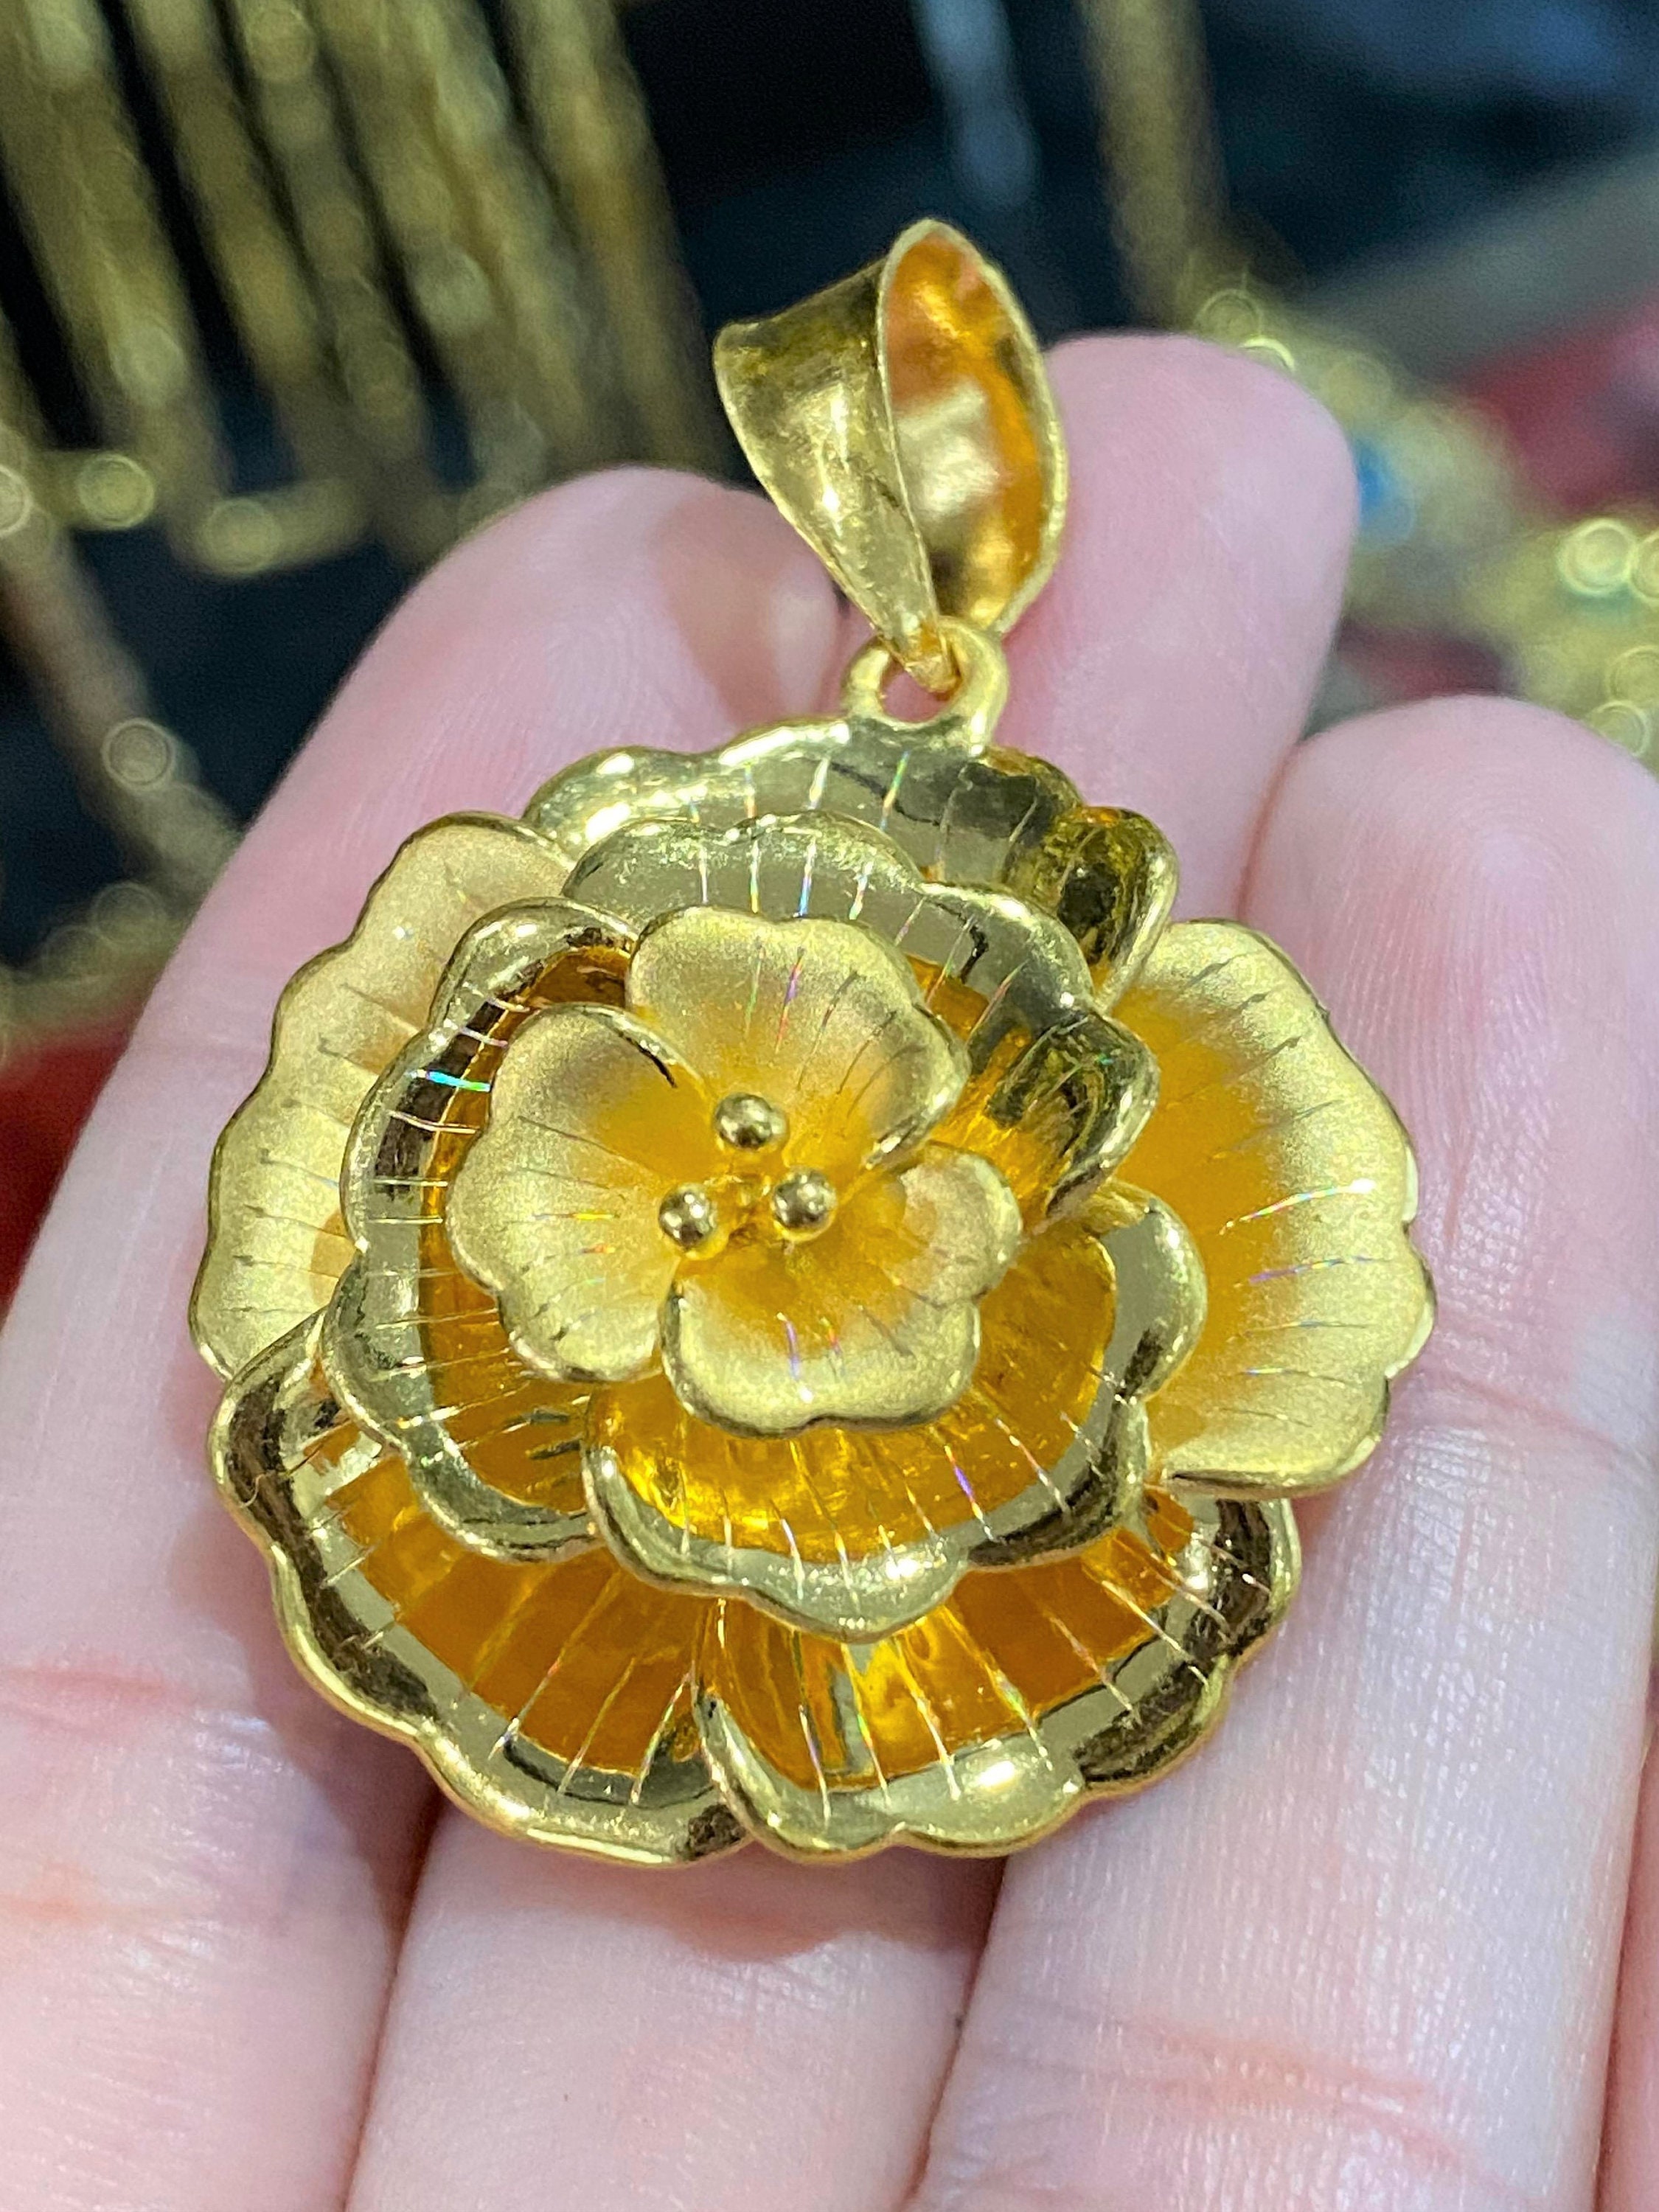 TIYINUO Real Gold 999 Authentic 24K Galsang Flower Pendant